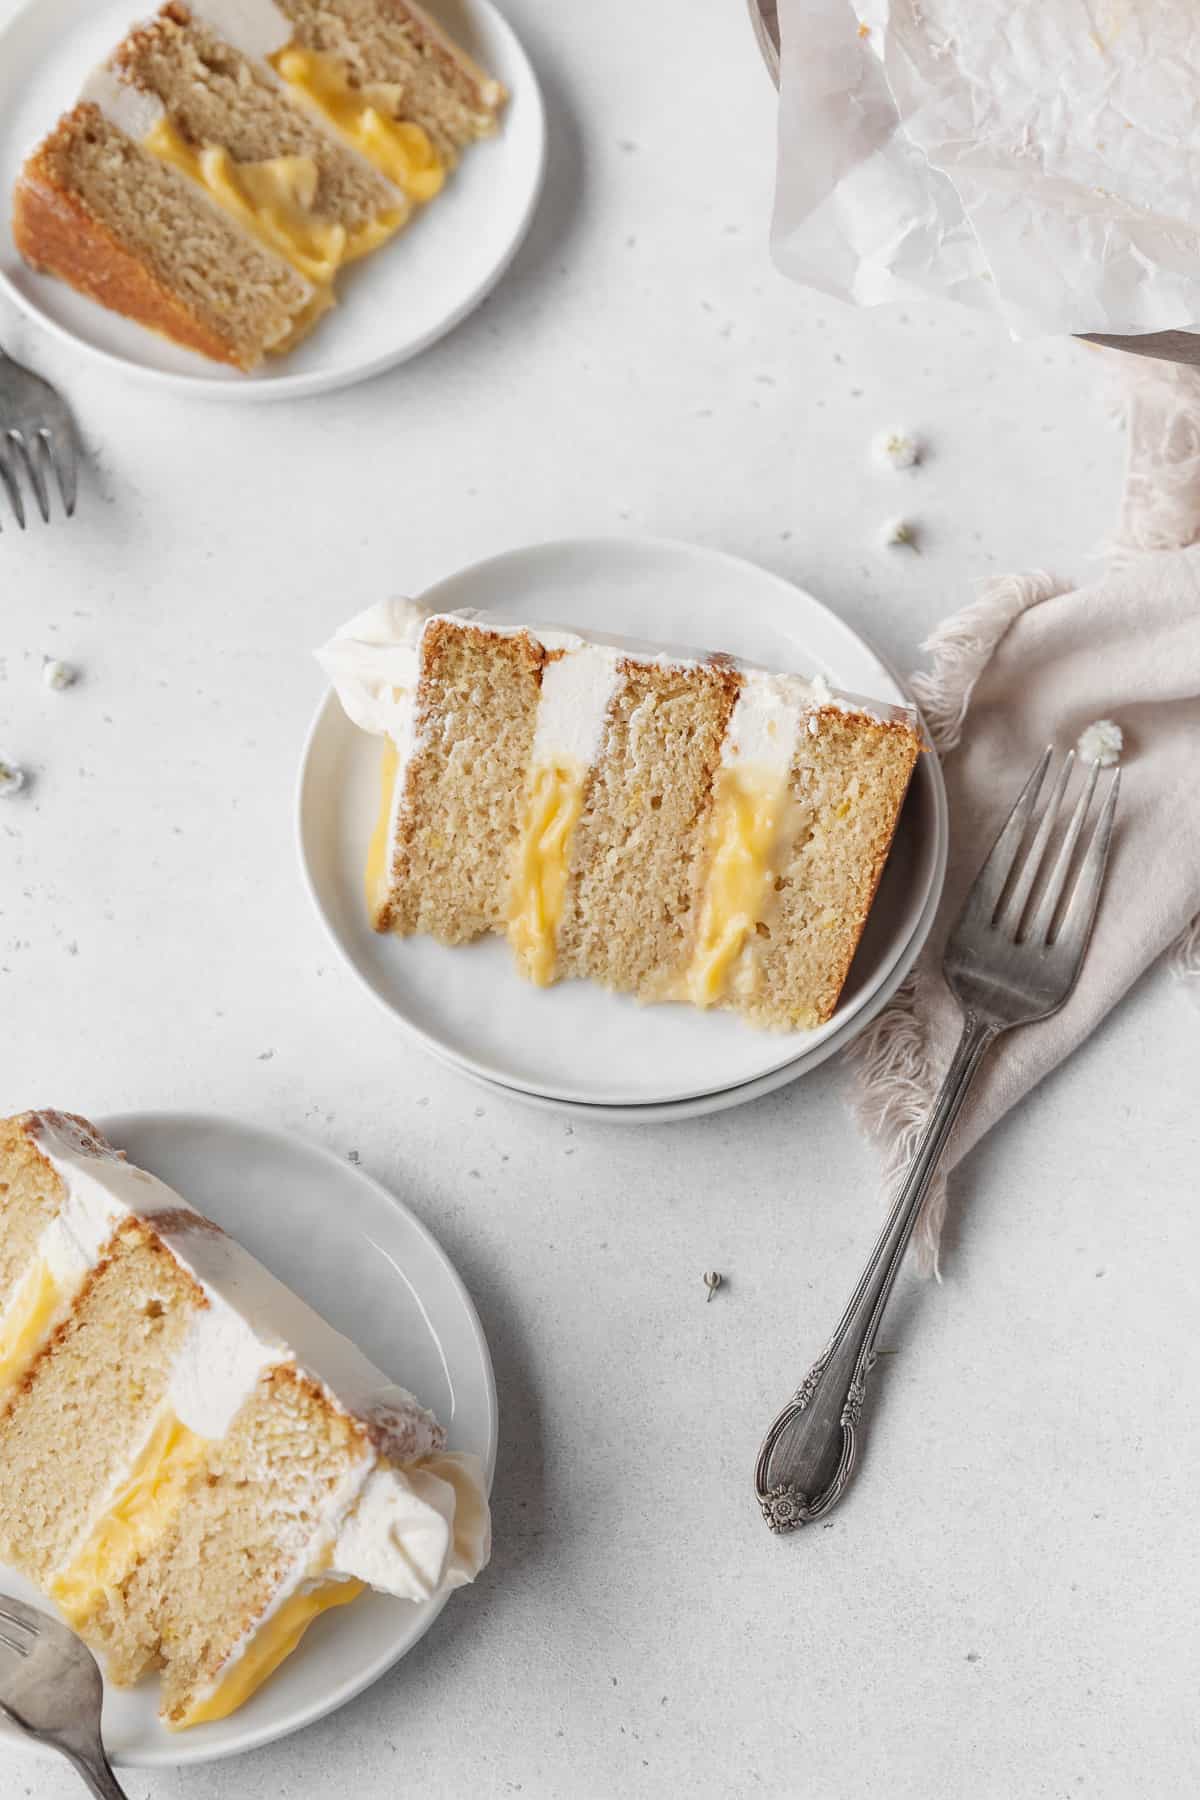 Overhead shot of 3 slices of dairy-free lemon curd layer cake on white dessert plates with silver forks.